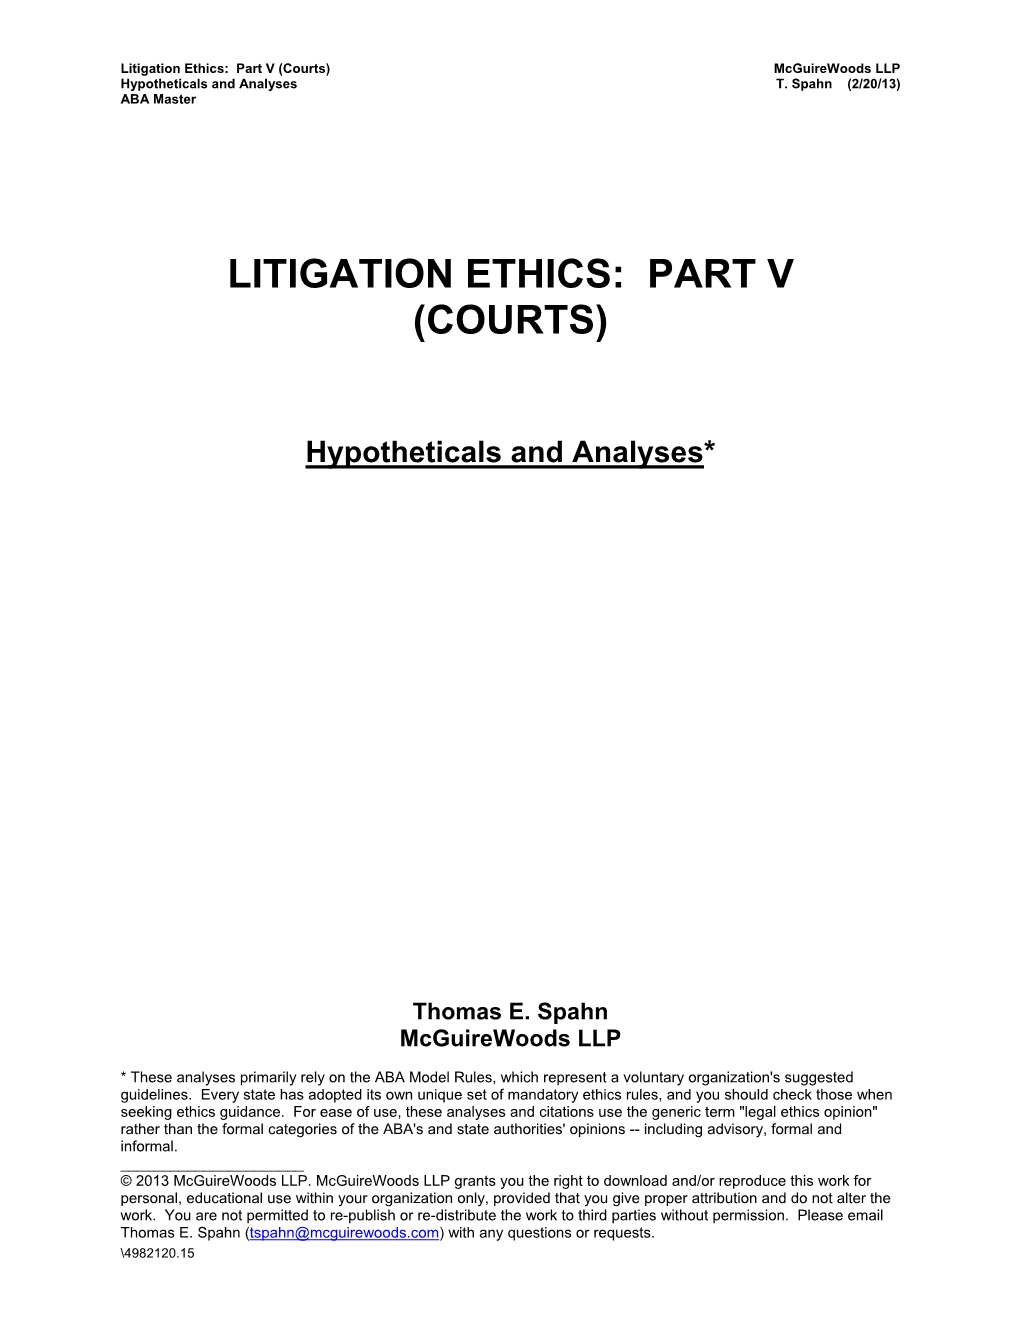 Litigation Ethics: Part V (Courts) Mcguirewoods LLP Hypotheticals and Analyses T